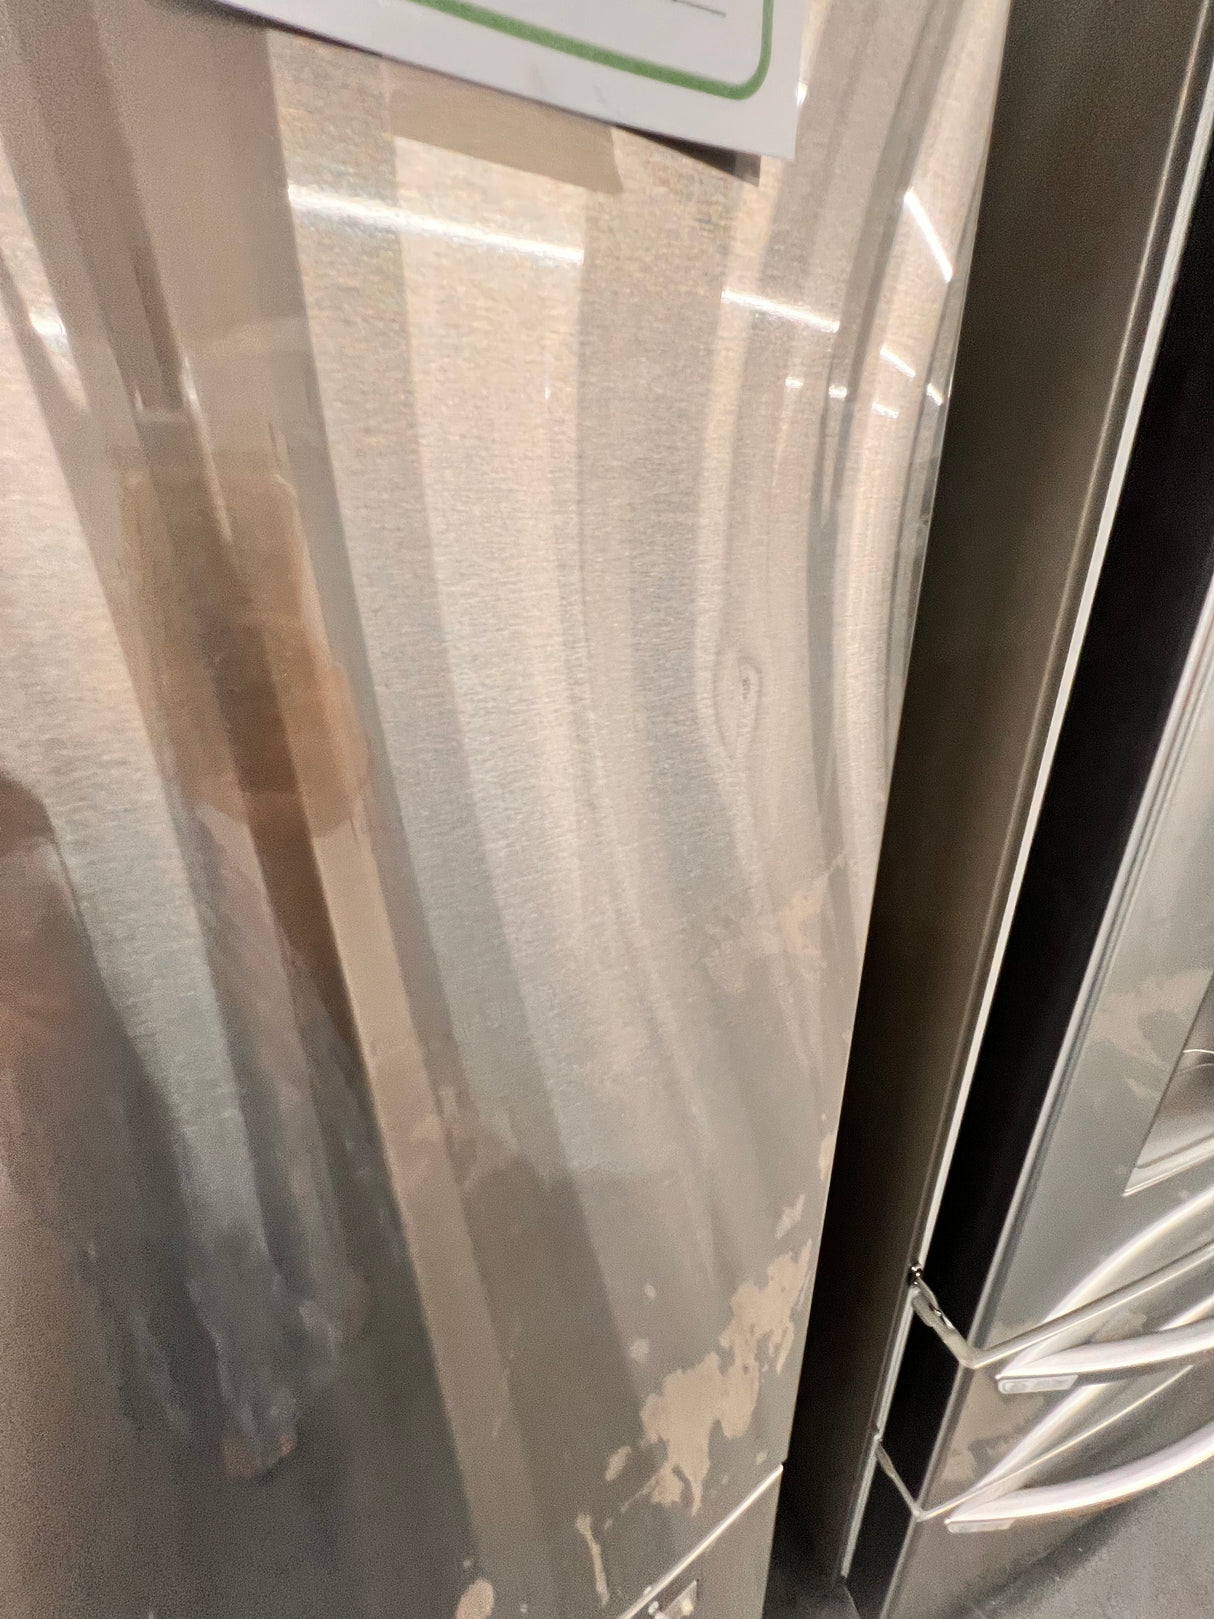 SAMSUNG FRENCH DOOR REFRIGERATOR STAINLESS STEEL. SCRATCH AND DENT RF27T5201SR